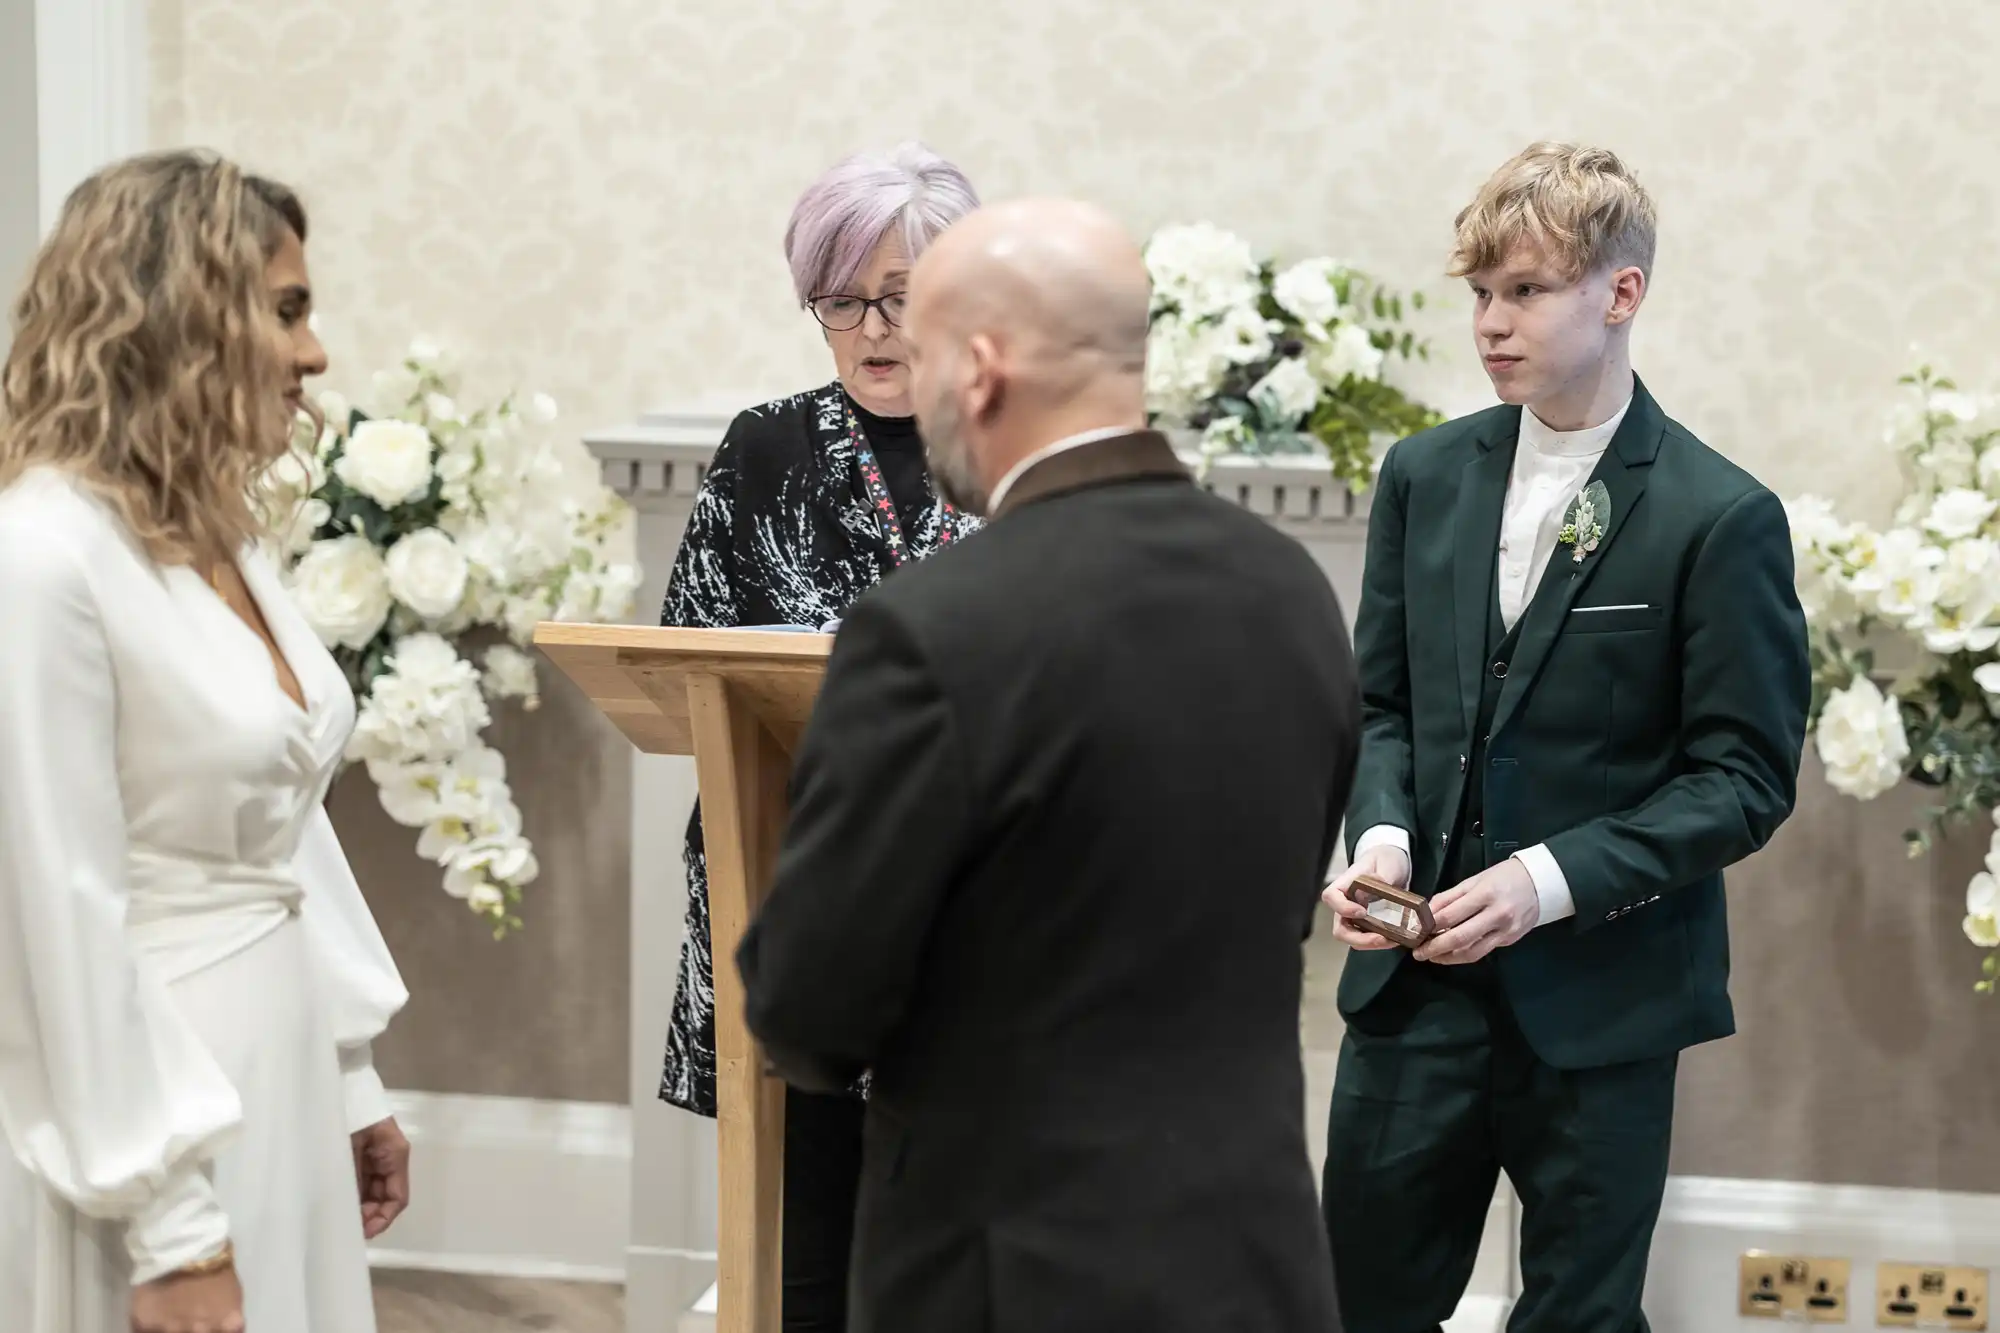 A bride and groom are standing opposite each other in front of an officiant at a wedding ceremony. Another person in a green suit stands nearby holding a small object, likely a ring box.